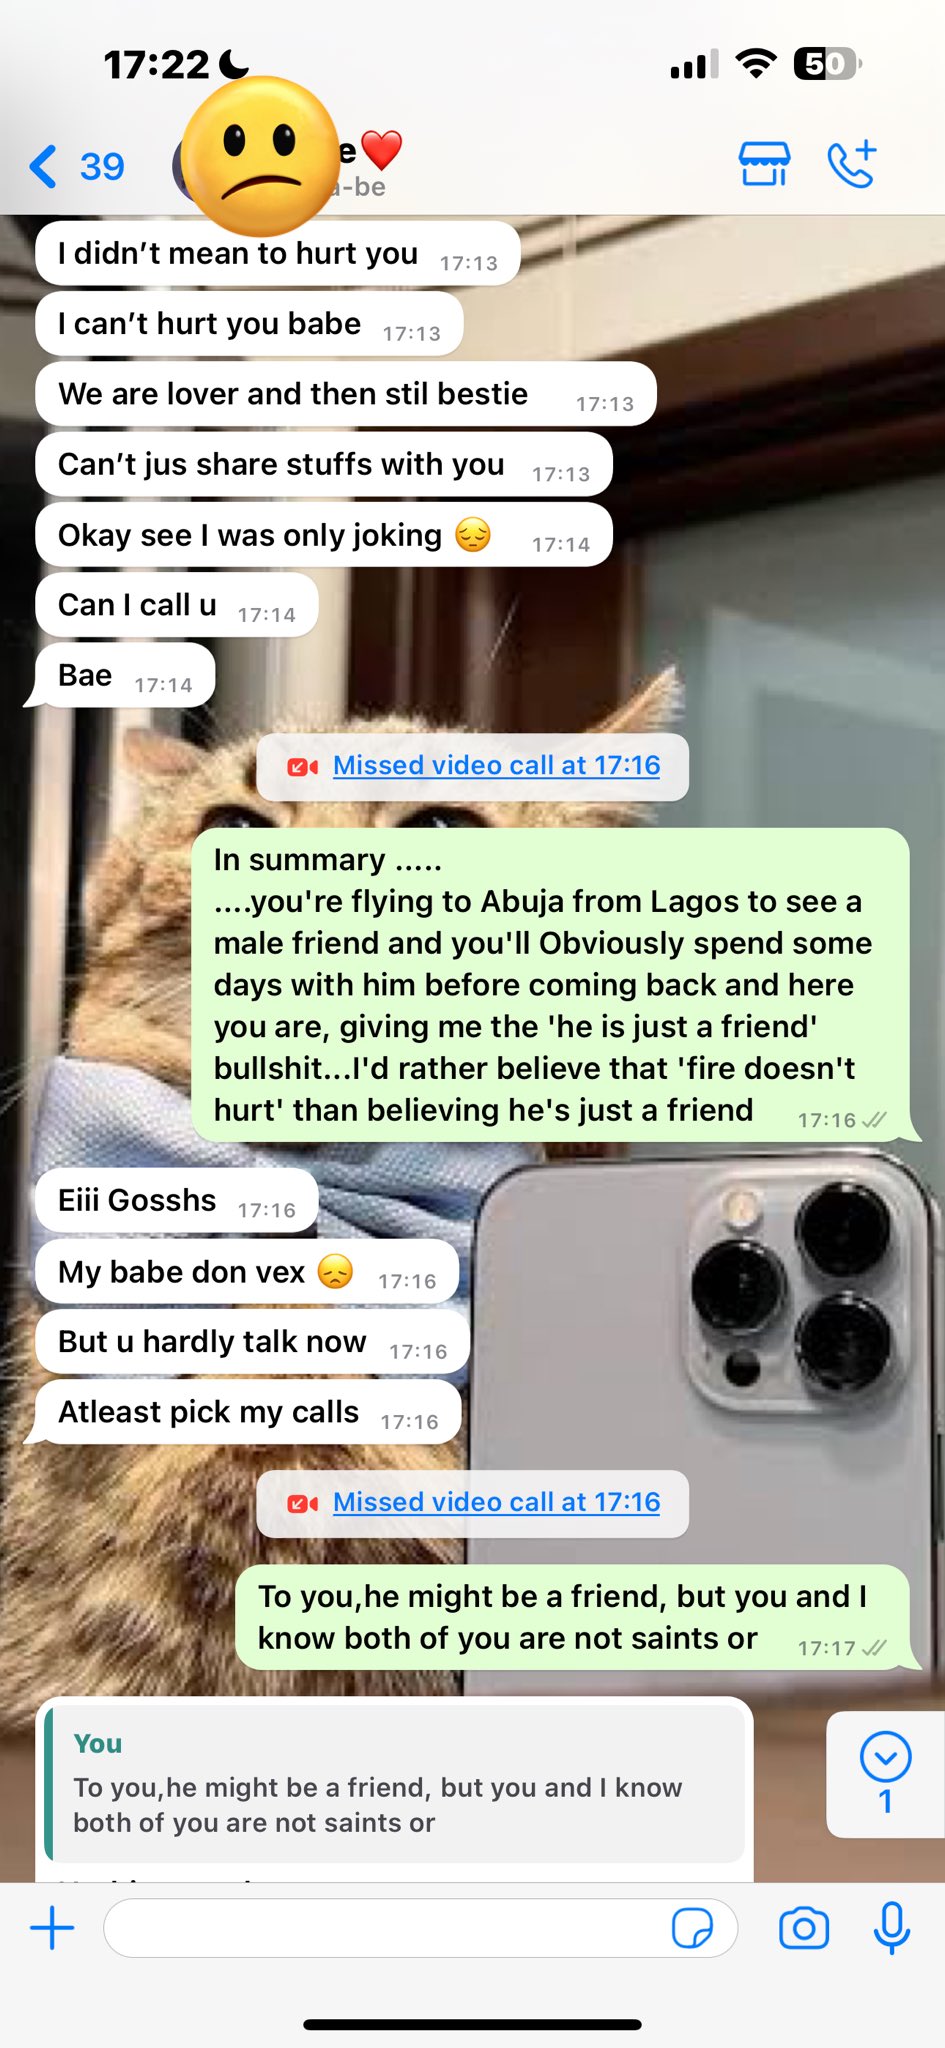 Nigerian man shares chat from his girlfriend who wants to go and chill in Abuja with a male friend